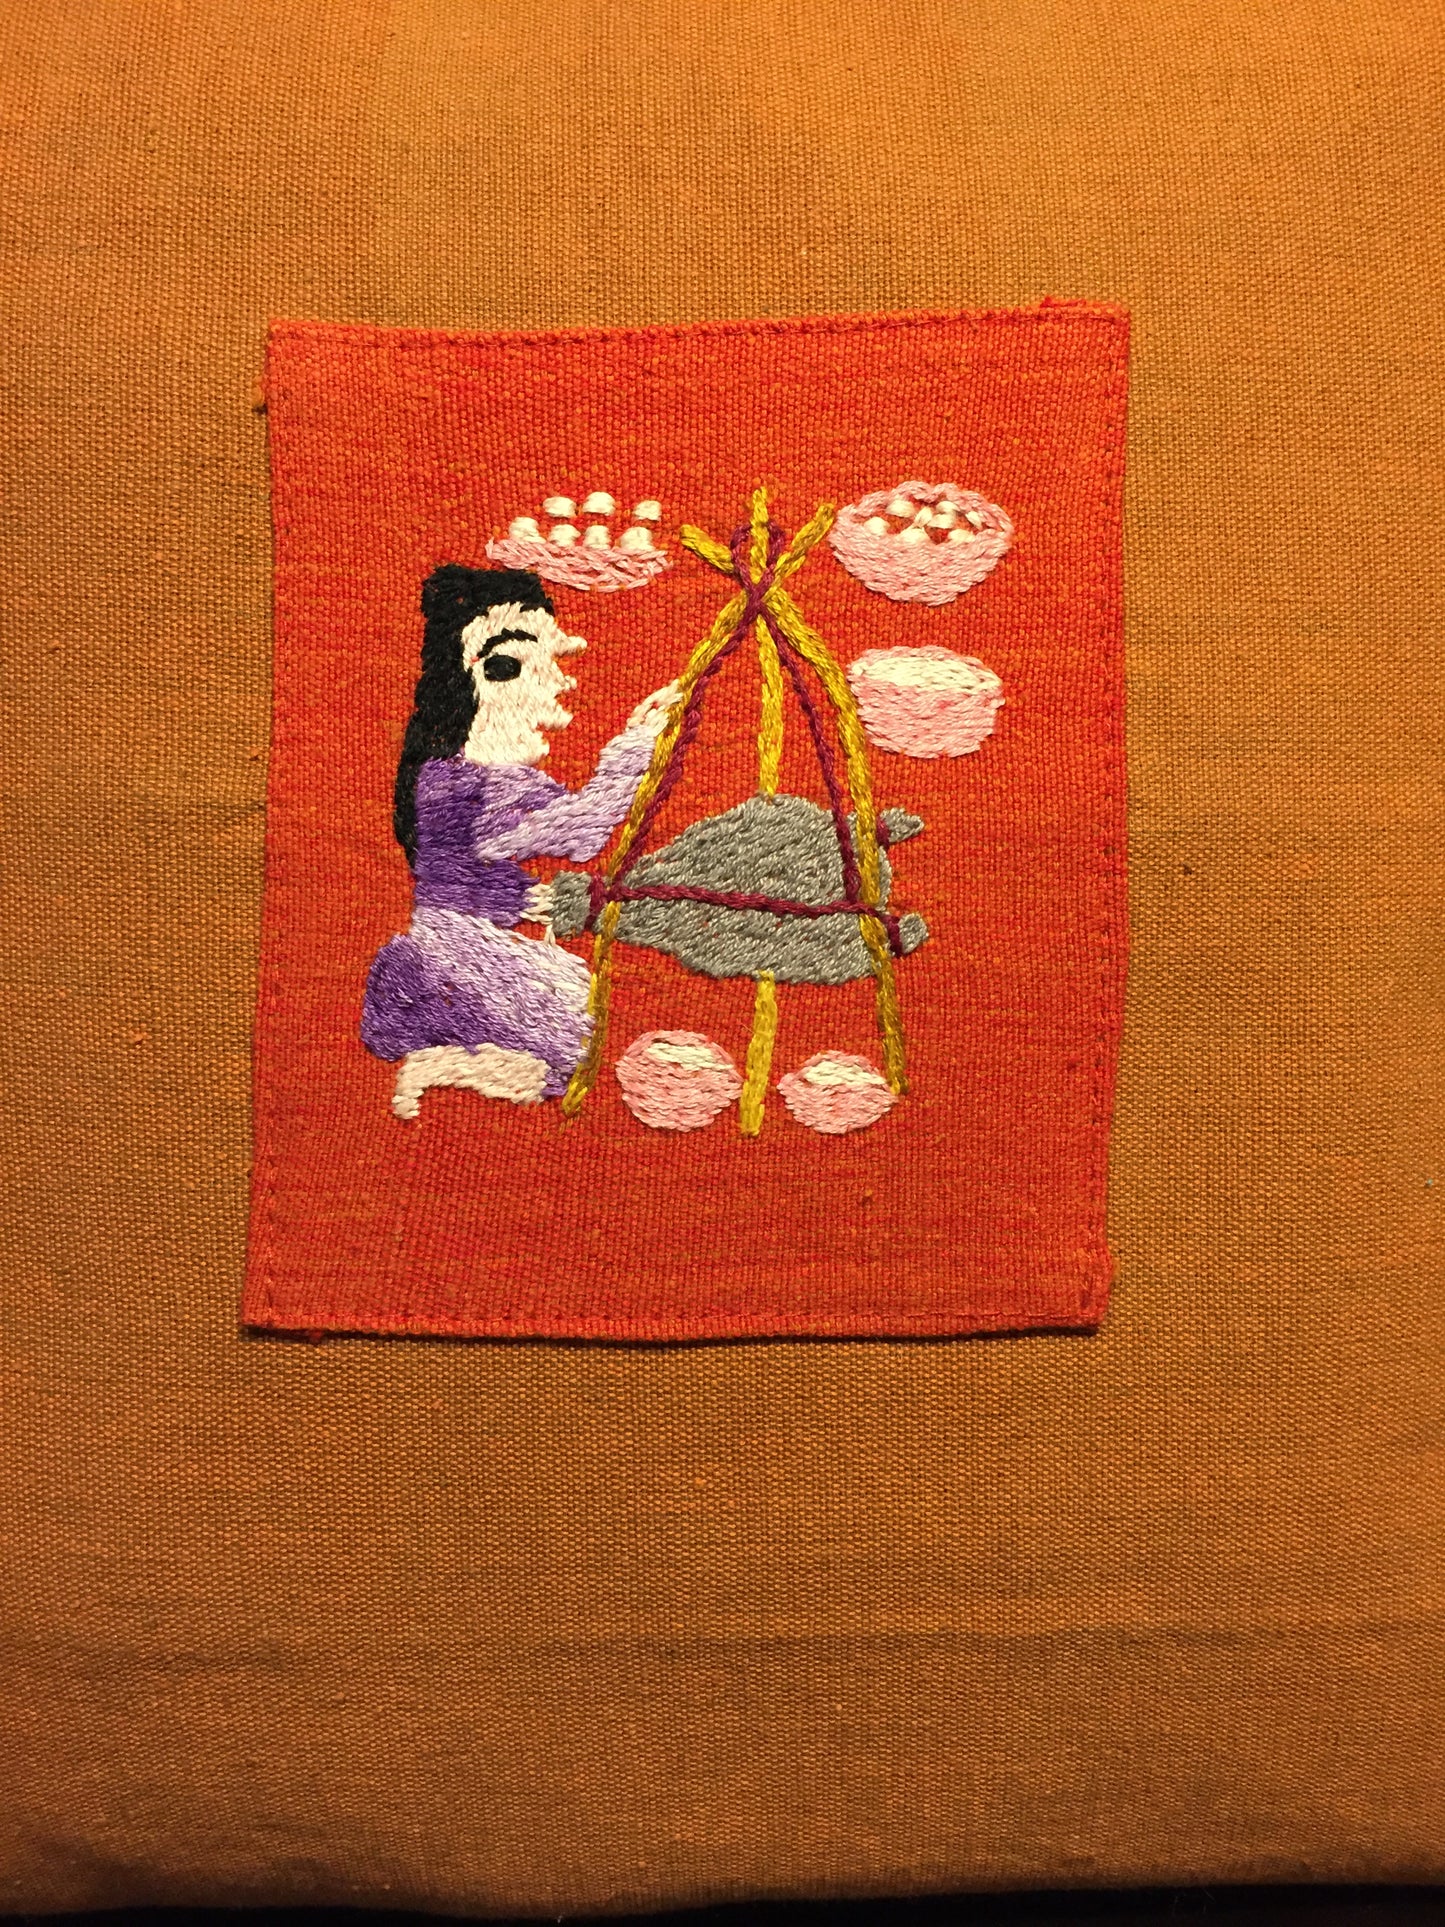 Handwoven Egyptian Cotton Cushion Cover - Hand Embroidered Art - Woman Making Cheese